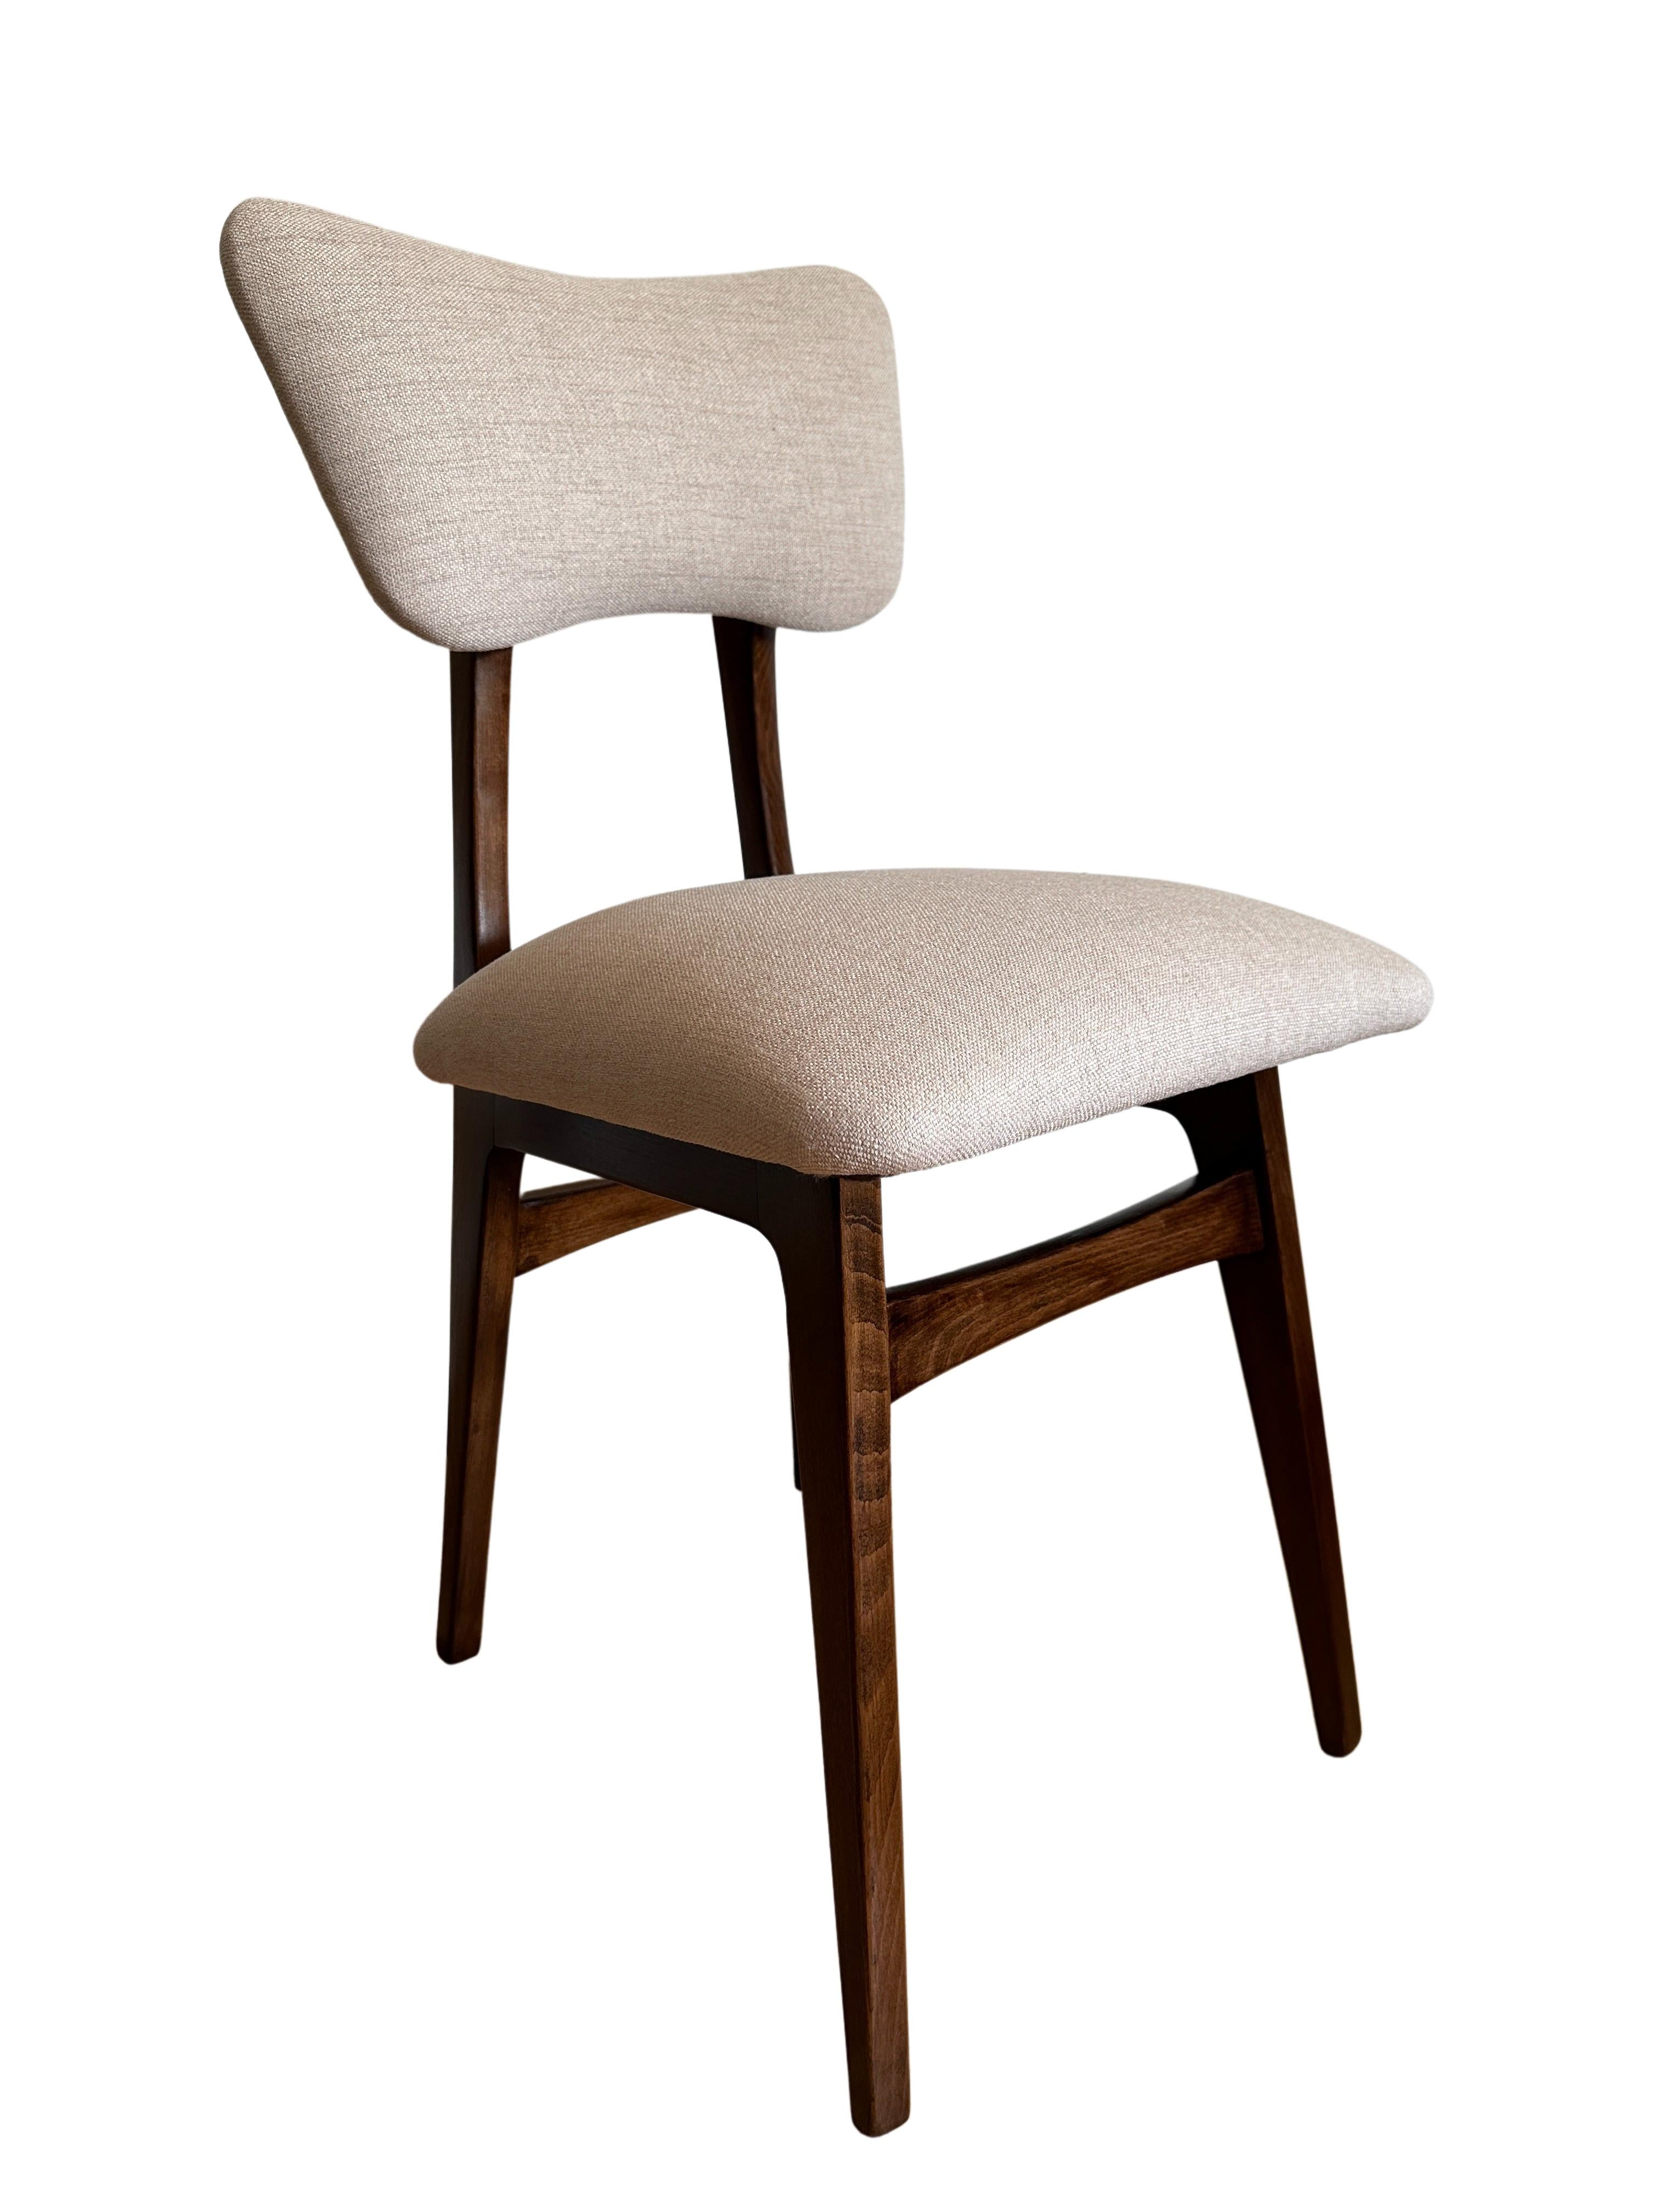 Set of Four Midcentury Beige Dining Chairs, Europe, 1960s For Sale 2